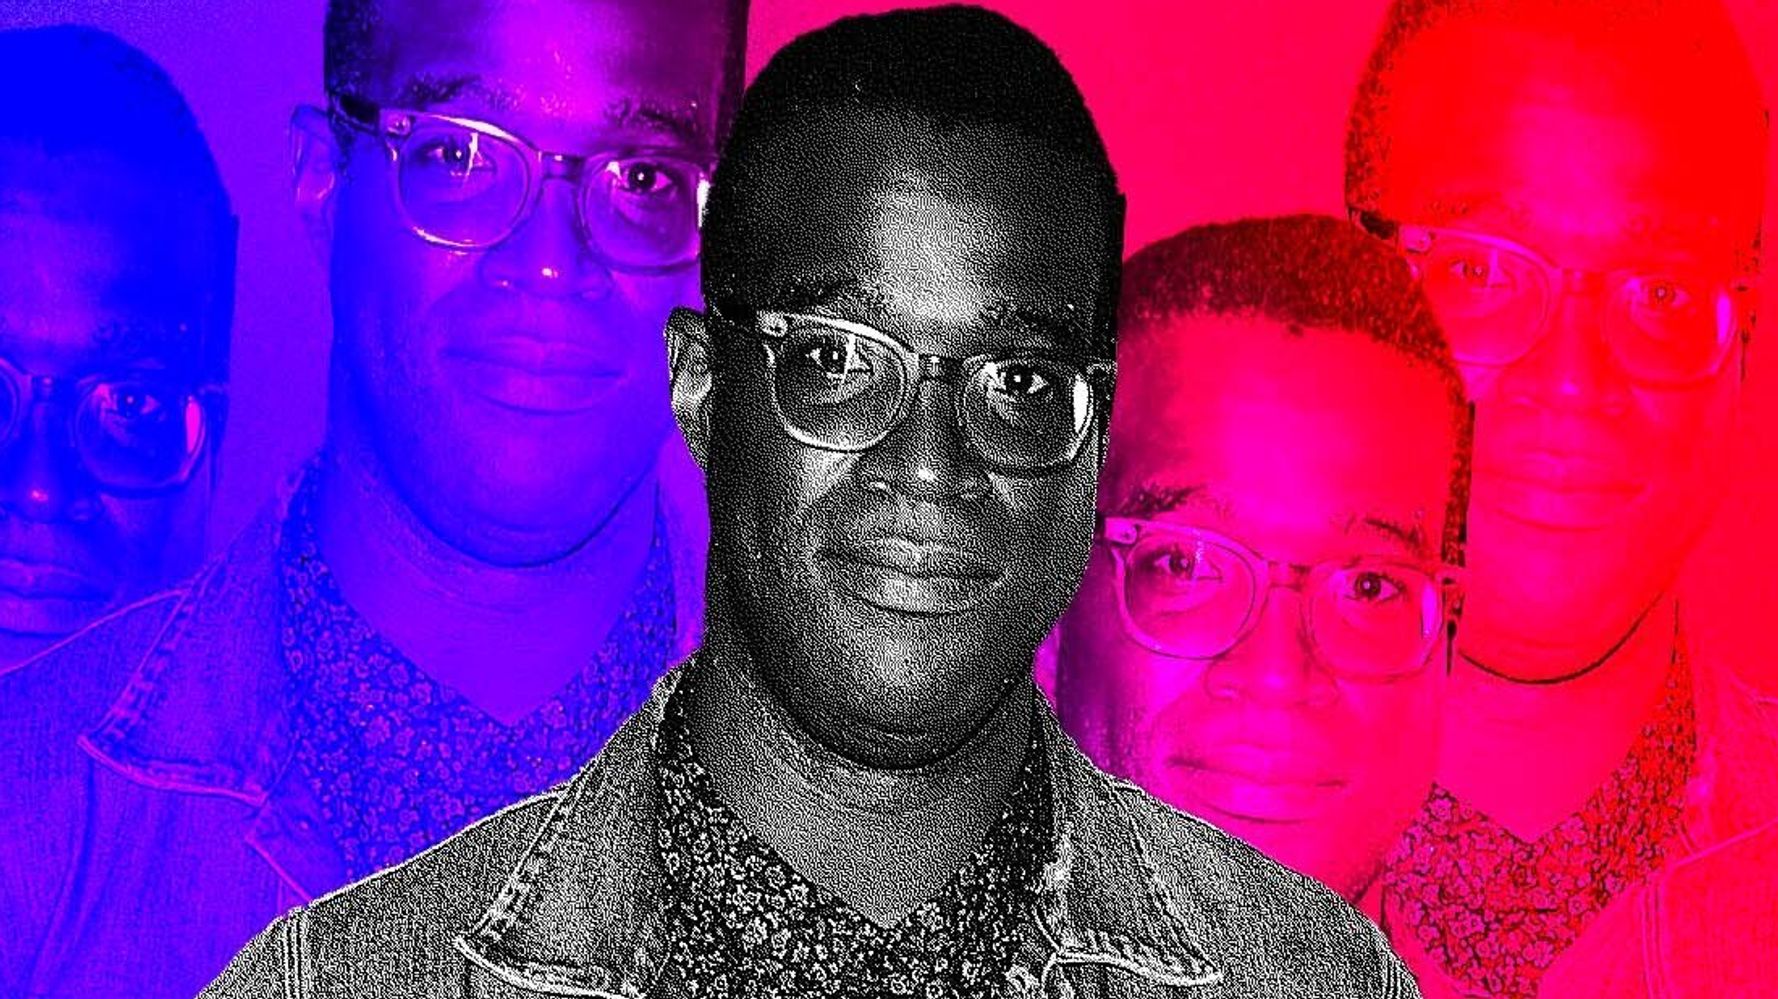 Indian College Girls Fuck - Tunde Adebimpe Never Chased Indie-God Status. He's Too Cool For That. |  HuffPost Entertainment